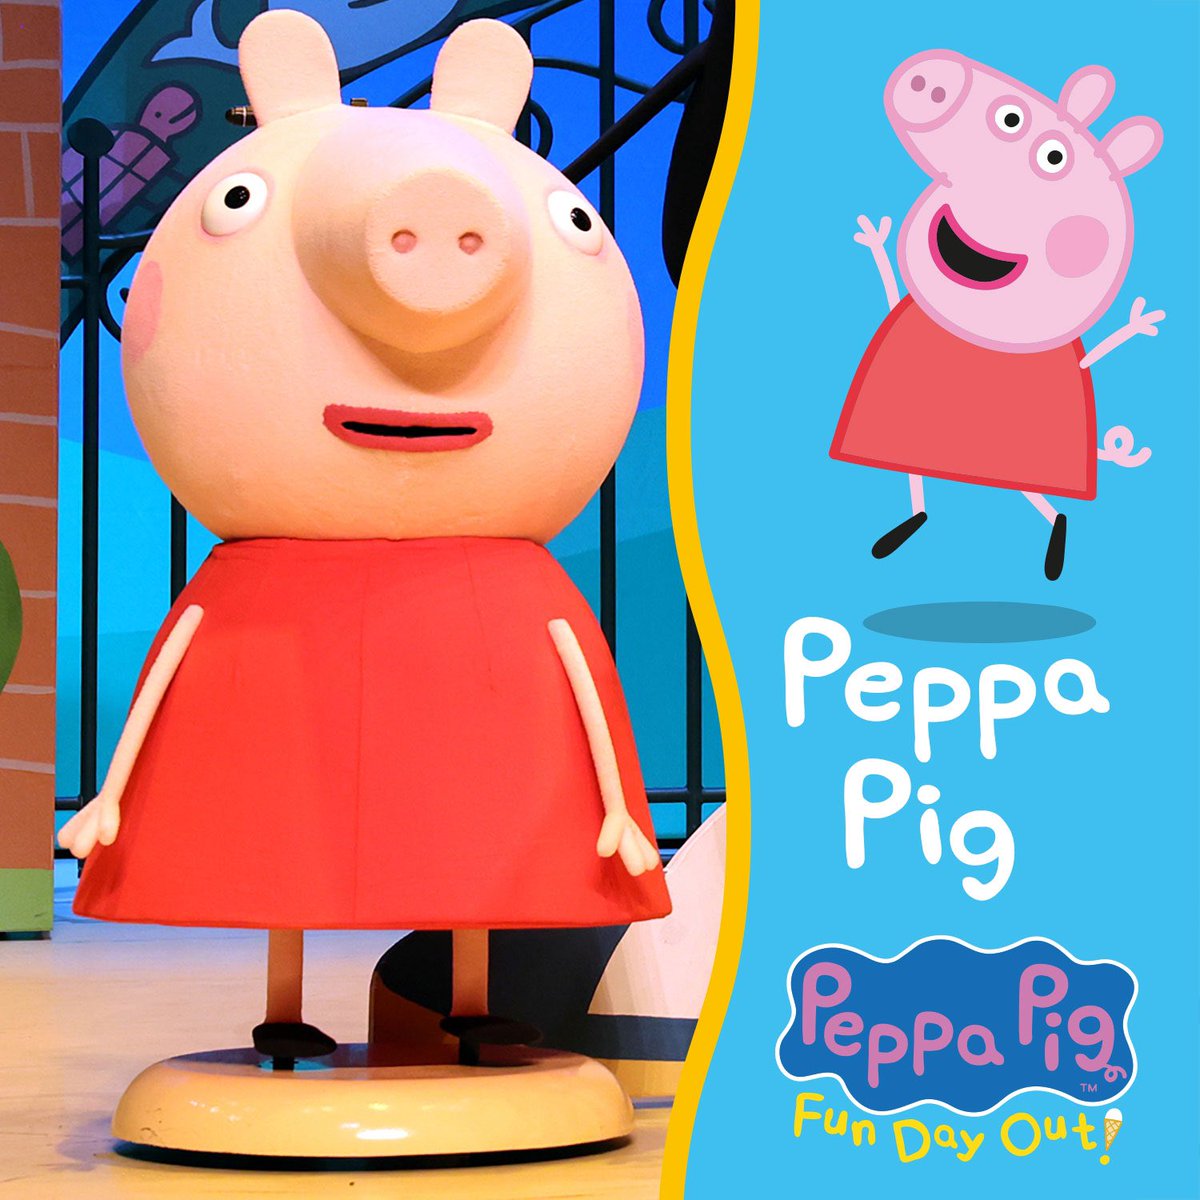 You’ve seen Peppa on TV, now see Peppa live on stage! 💖 🎭 #PeppaPigLive